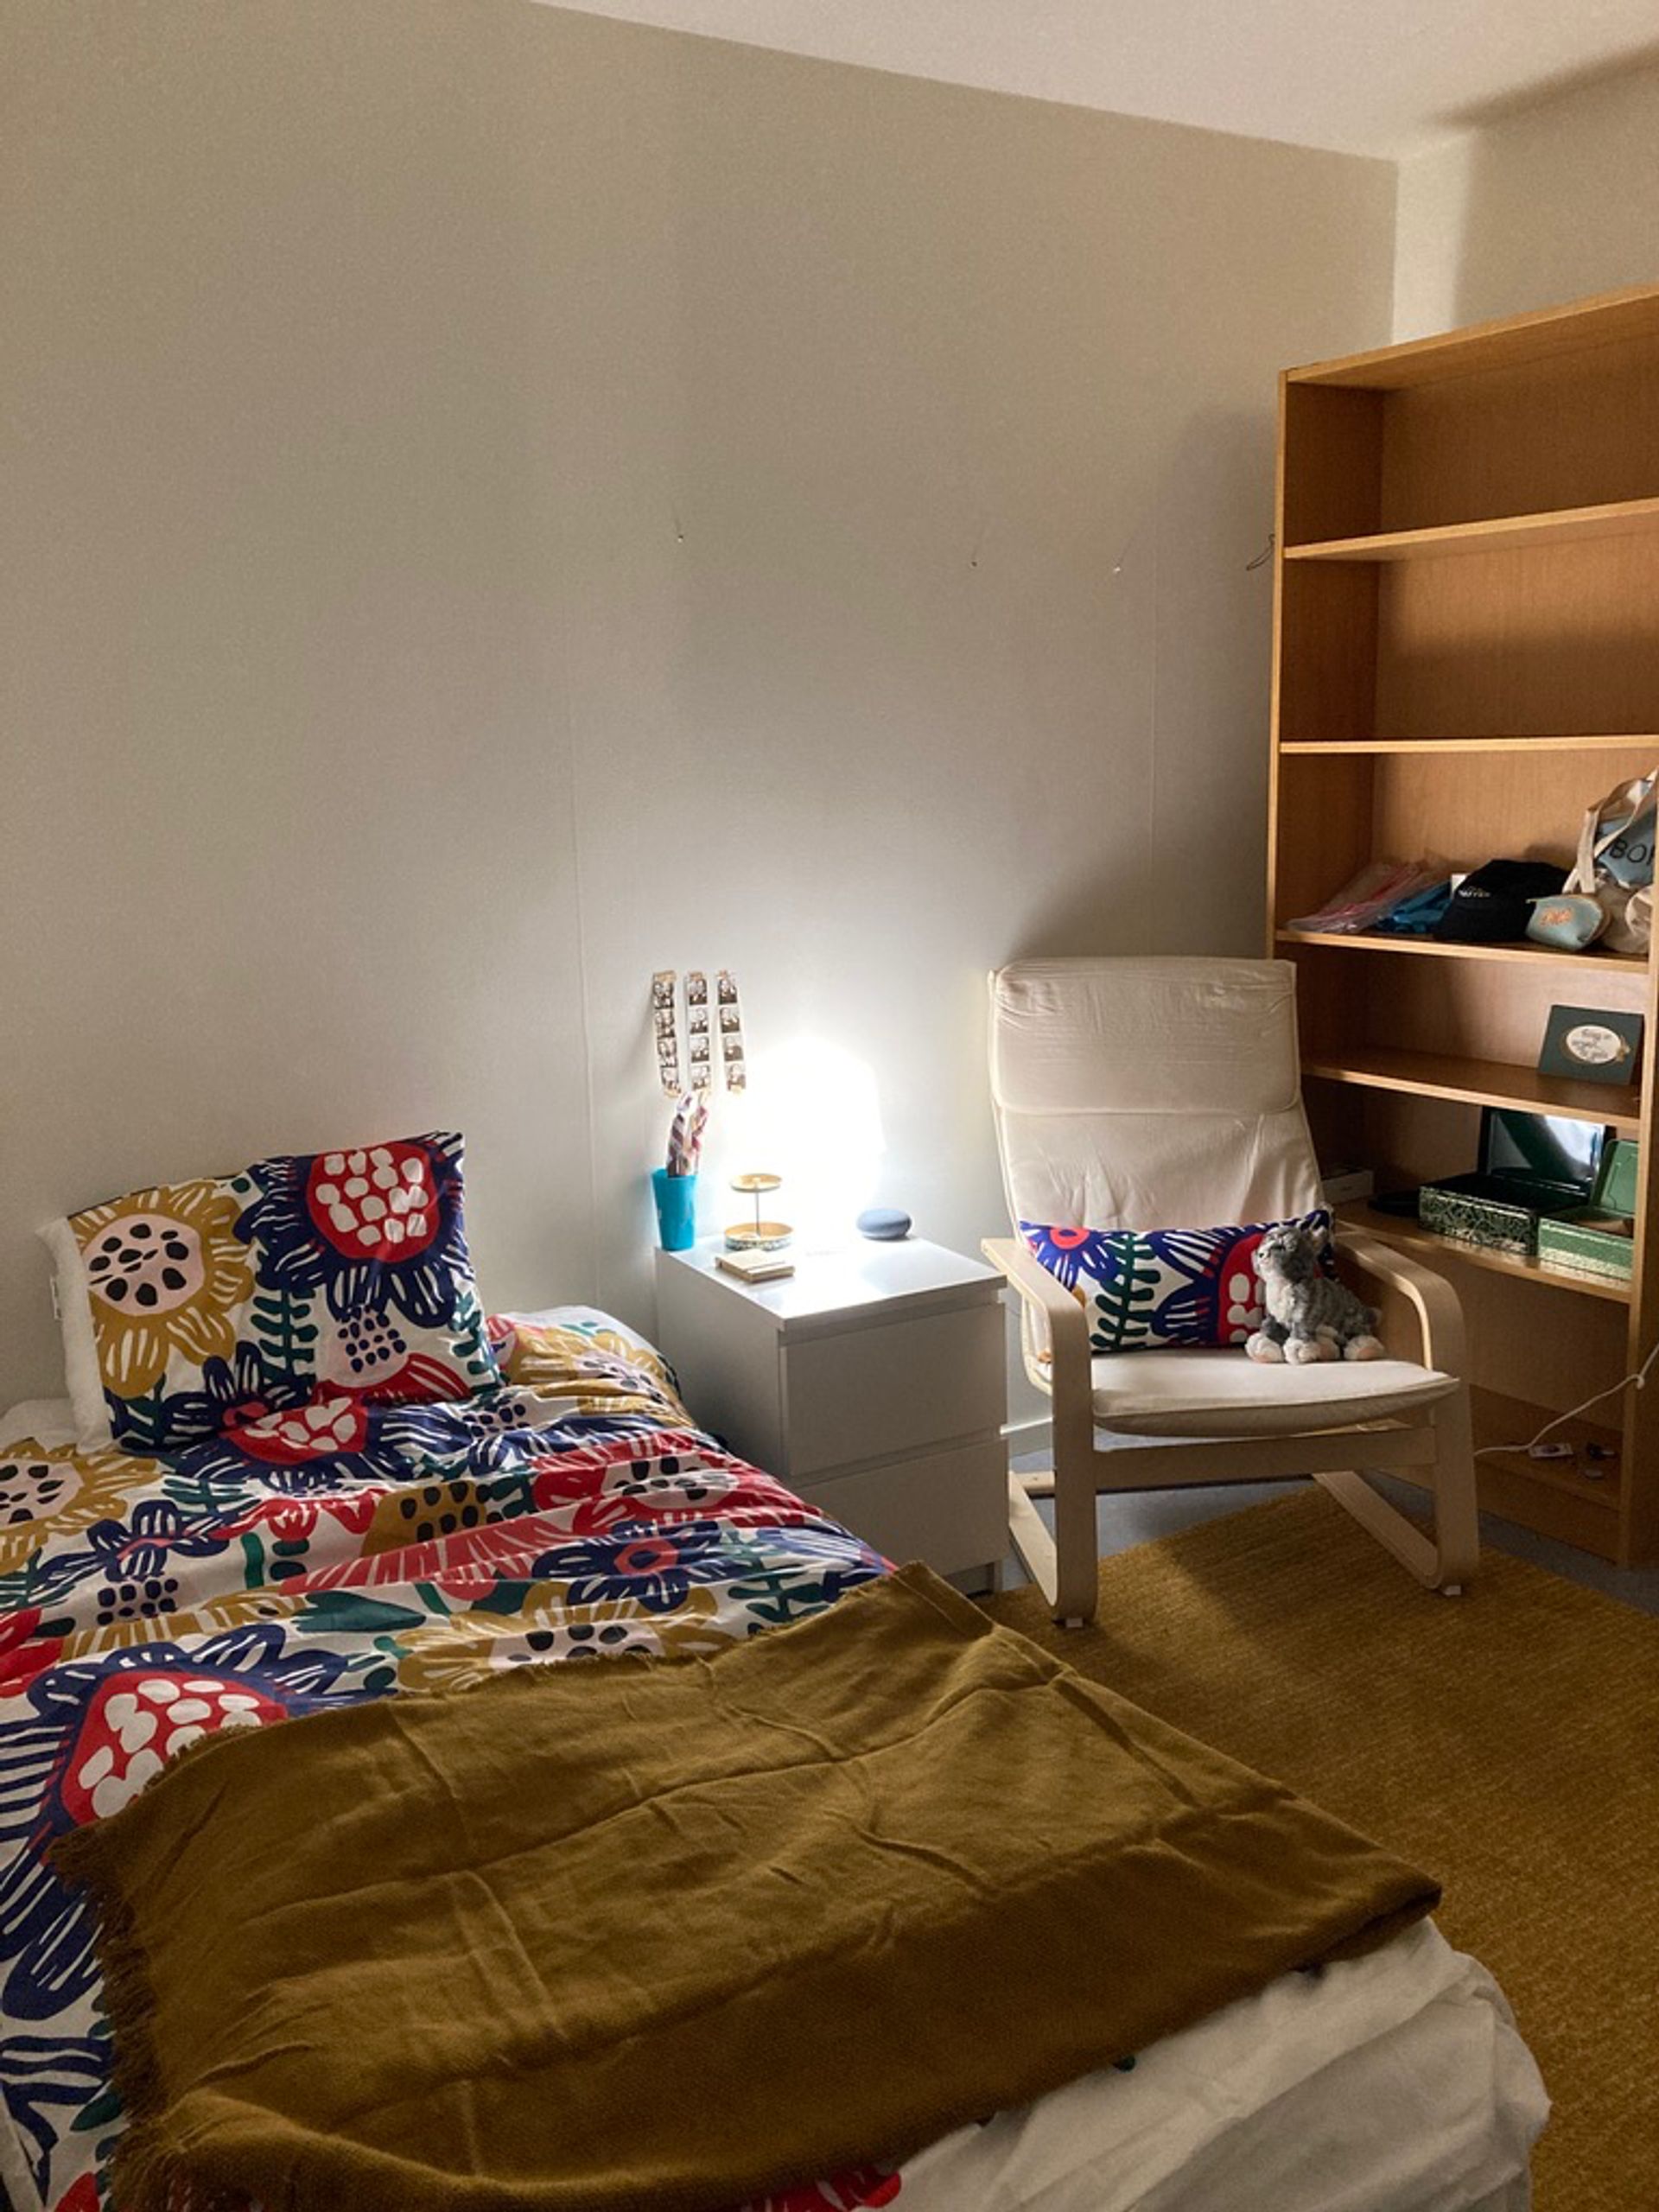 An accommodation witb a bed, chair, and bookshelf in a small bedroom.